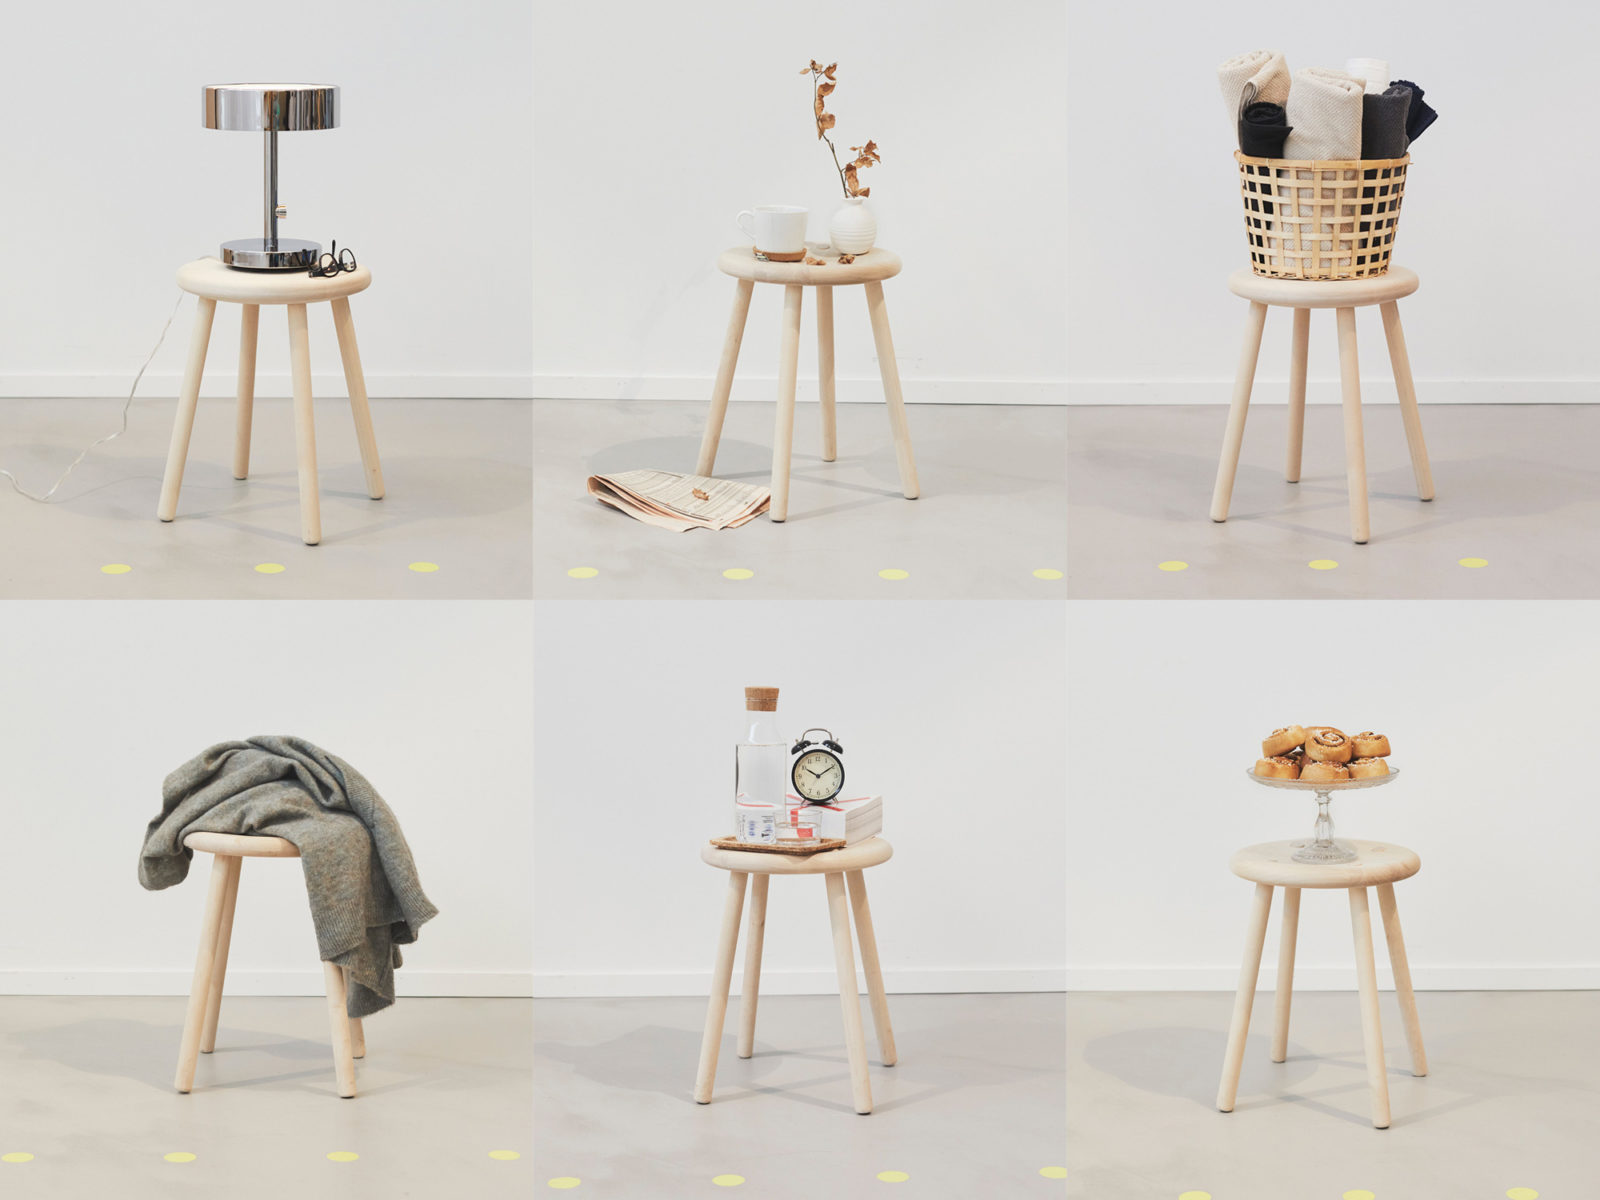 Six images of blond wood stool used for different purposes such as bedside table, and side table.